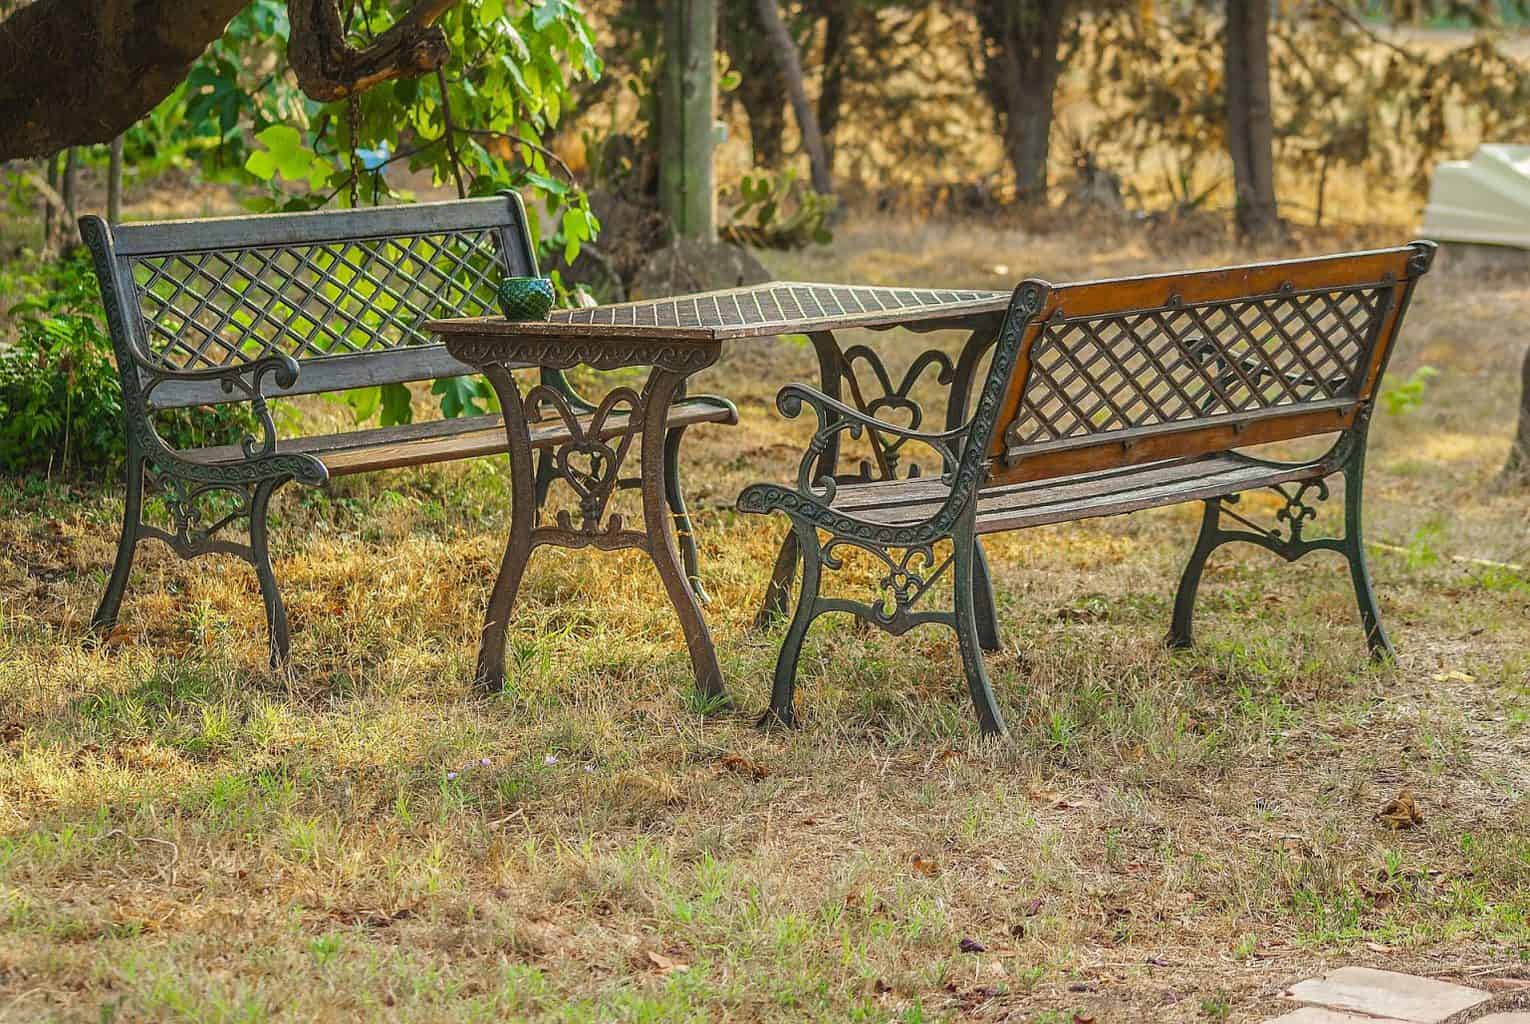 How to Clean Wrought Iron Patio Furniture